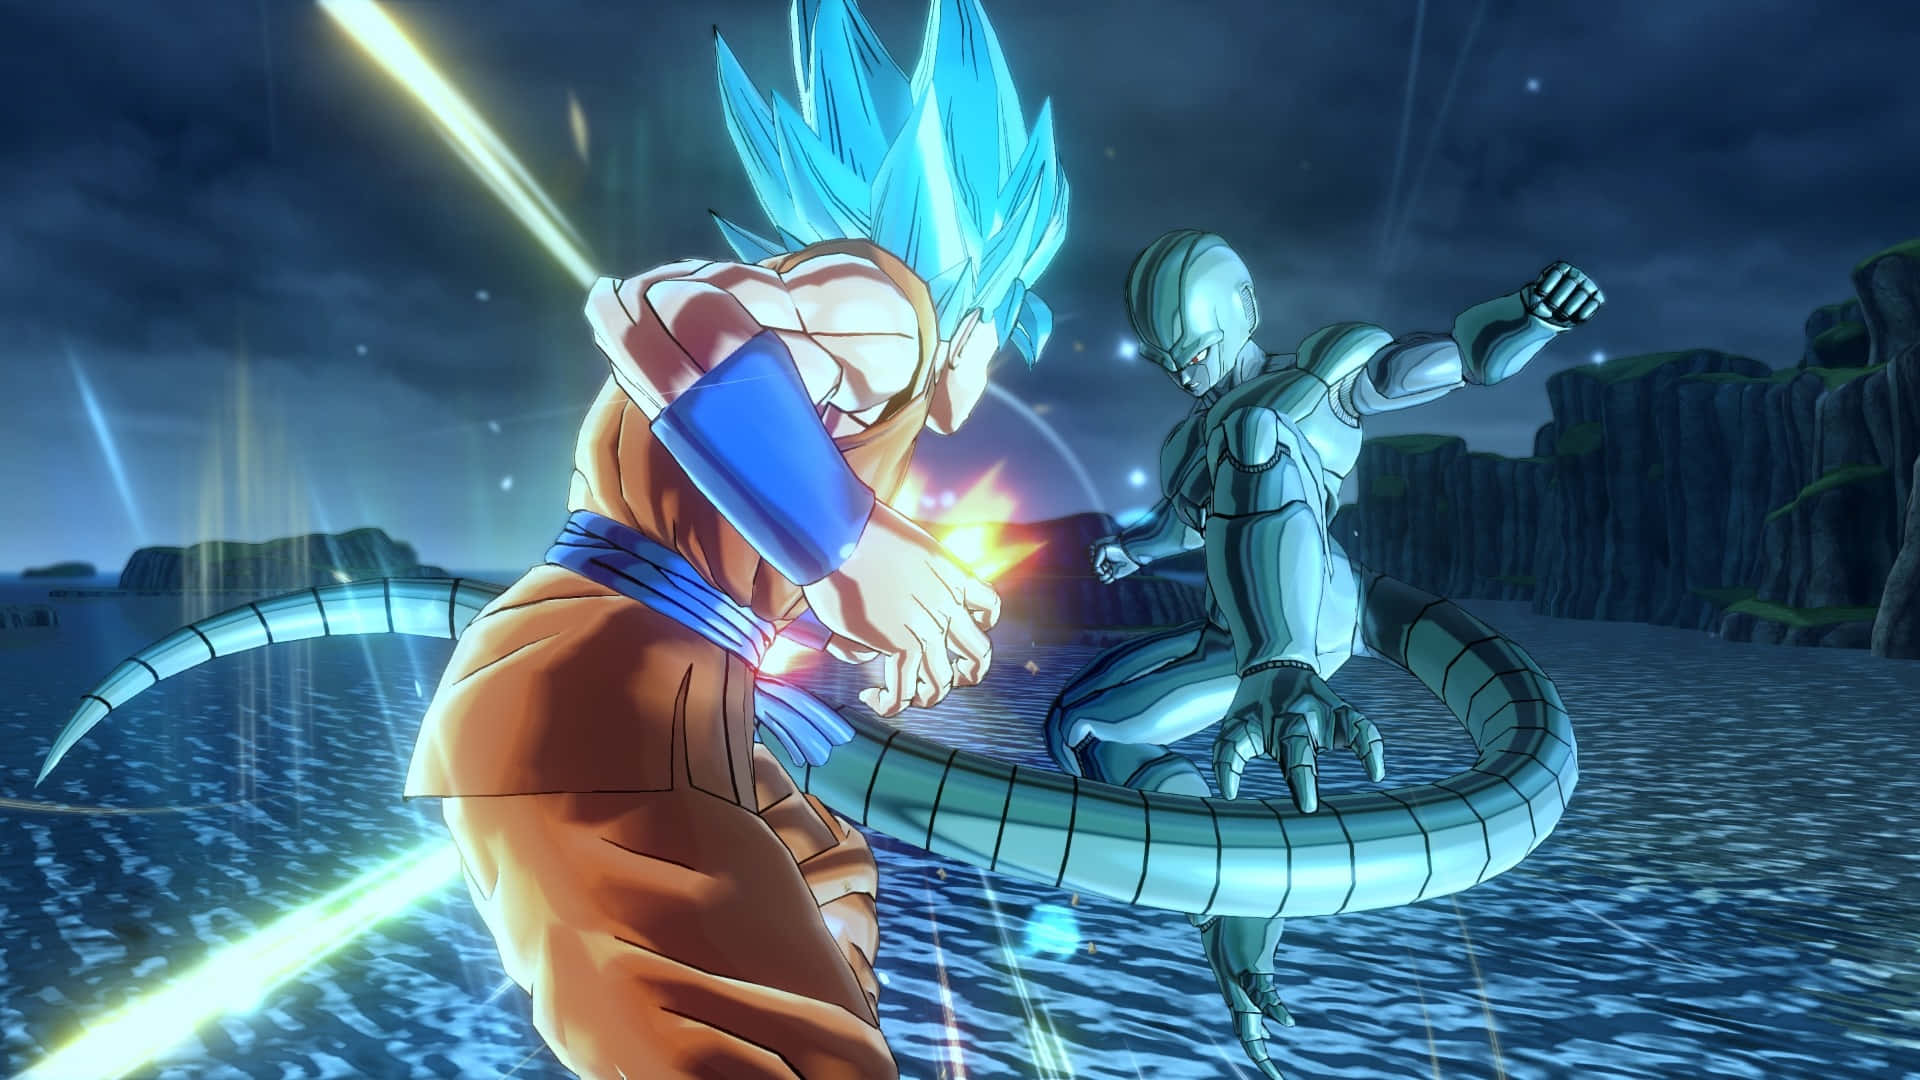 Take on new opponents in DRAGON BALL XENOVERSE 2! Wallpaper